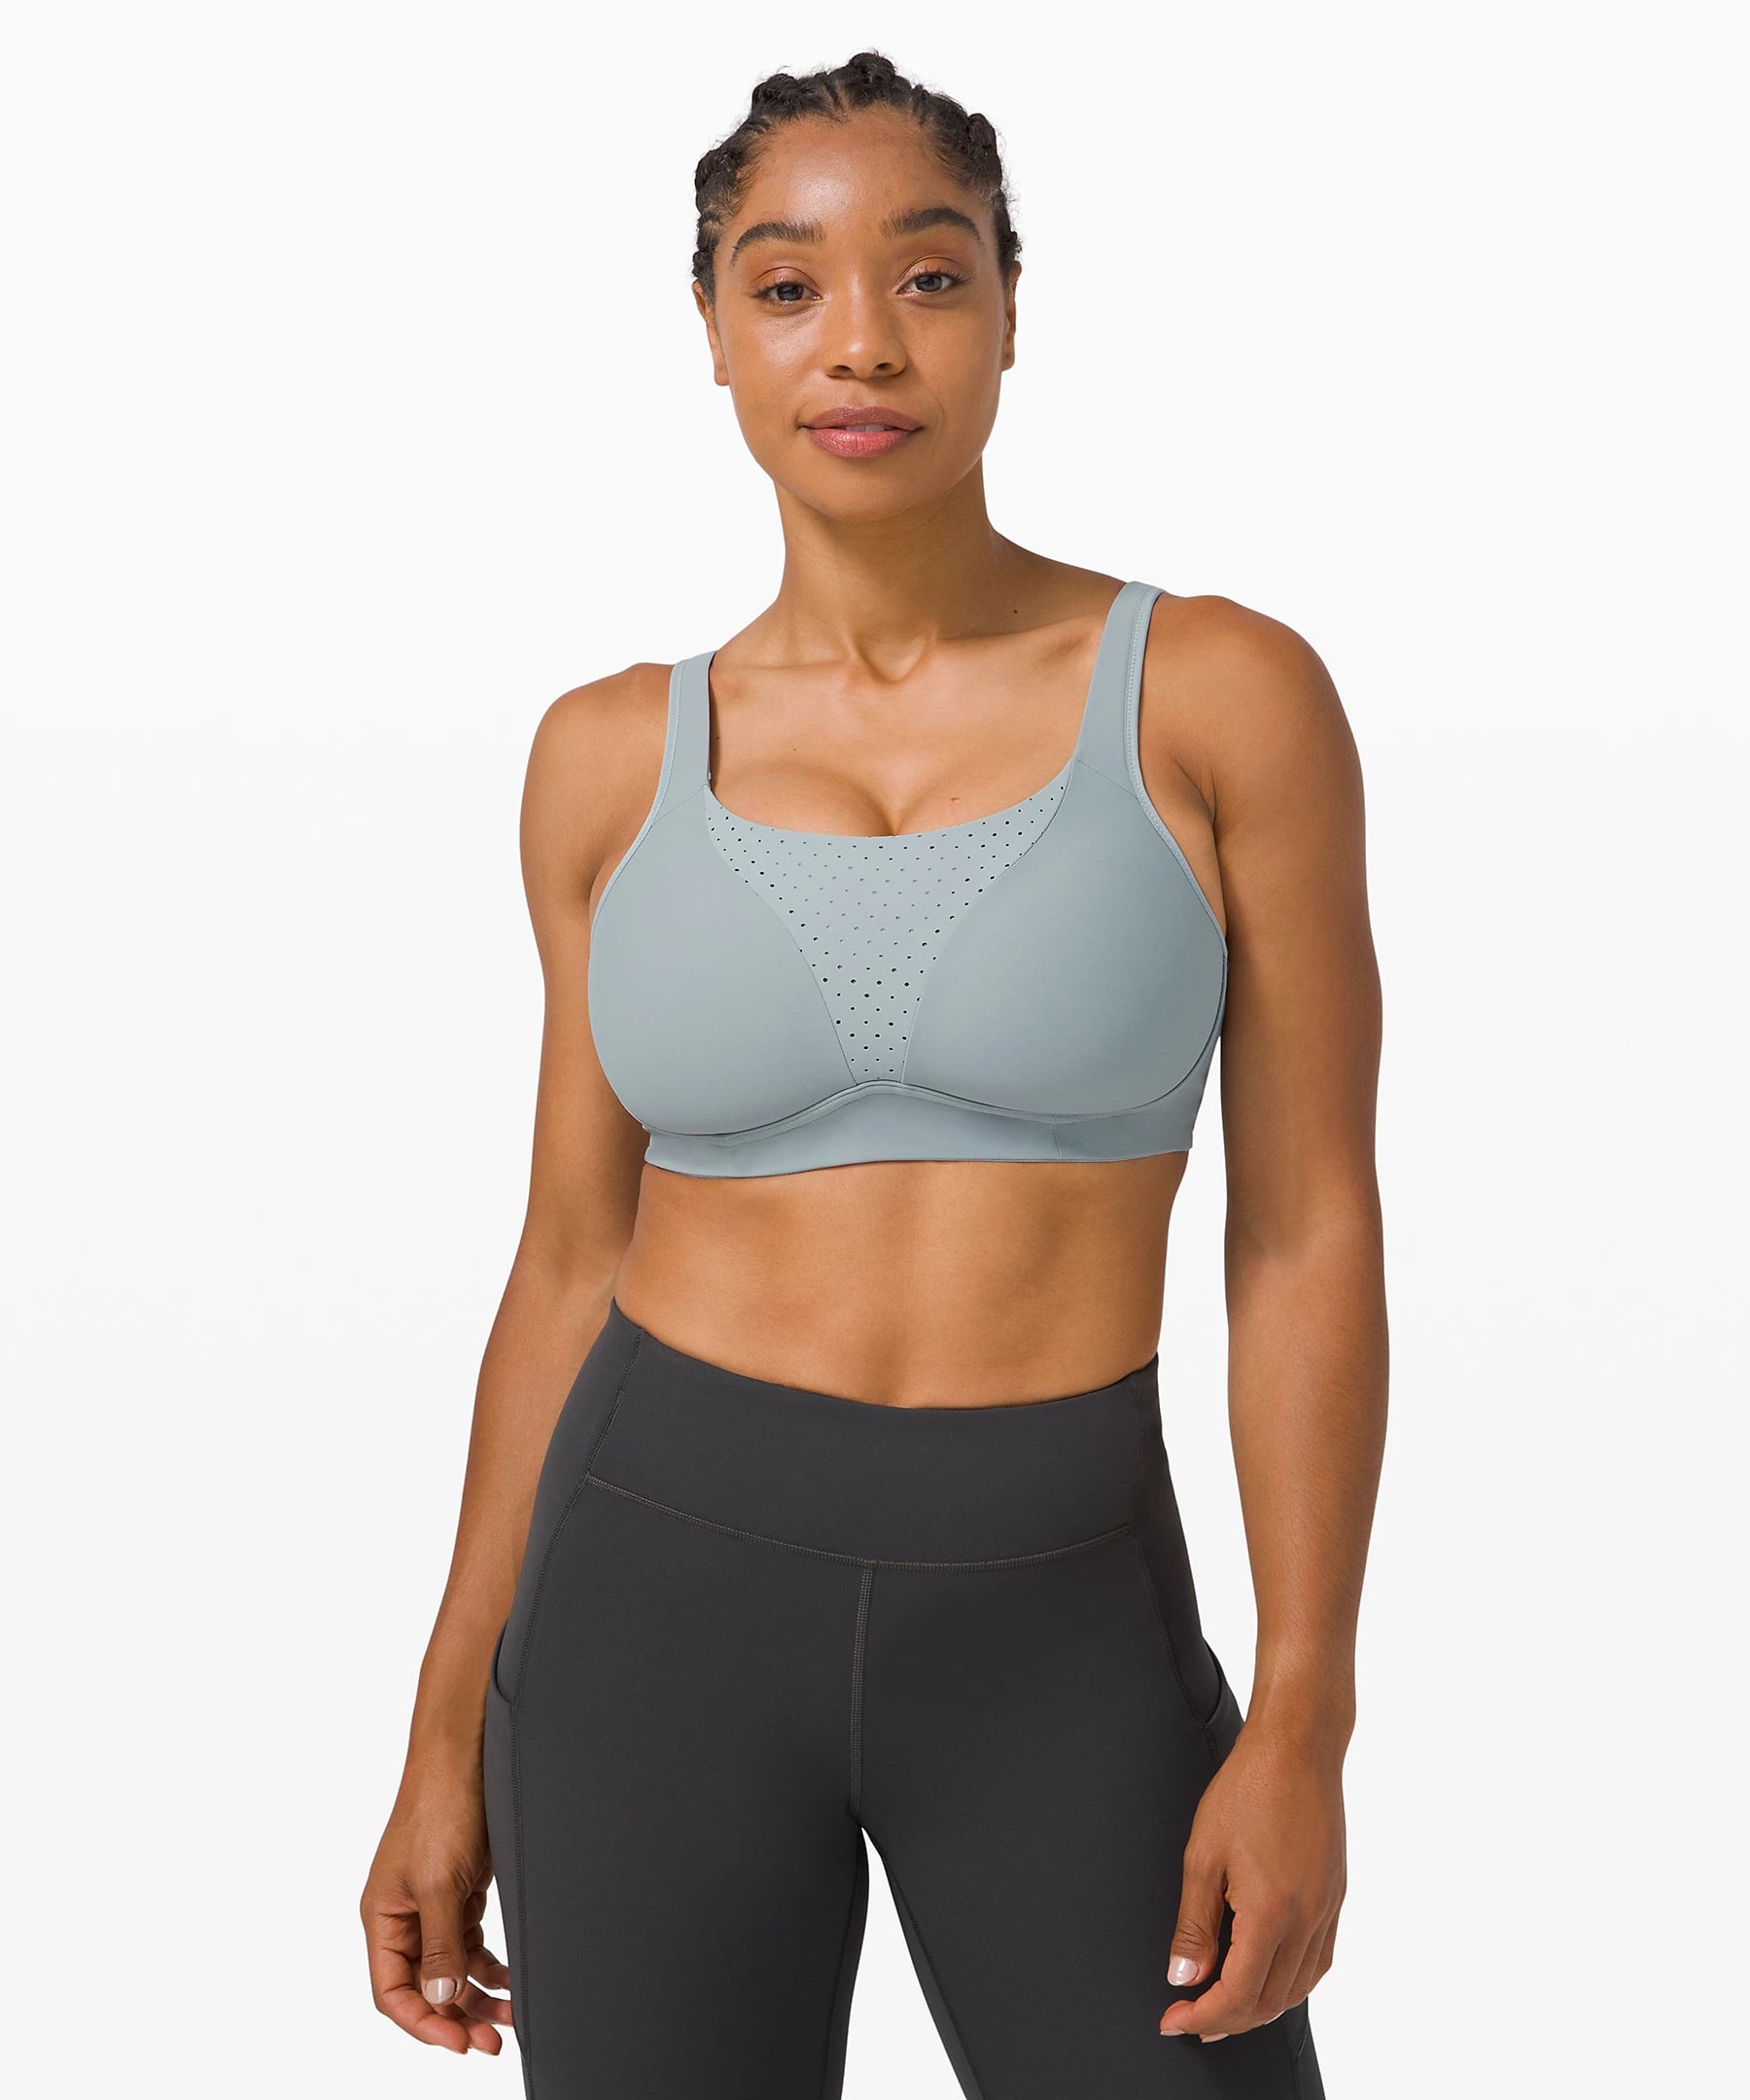 The Best Sports Bras For Running in 2020